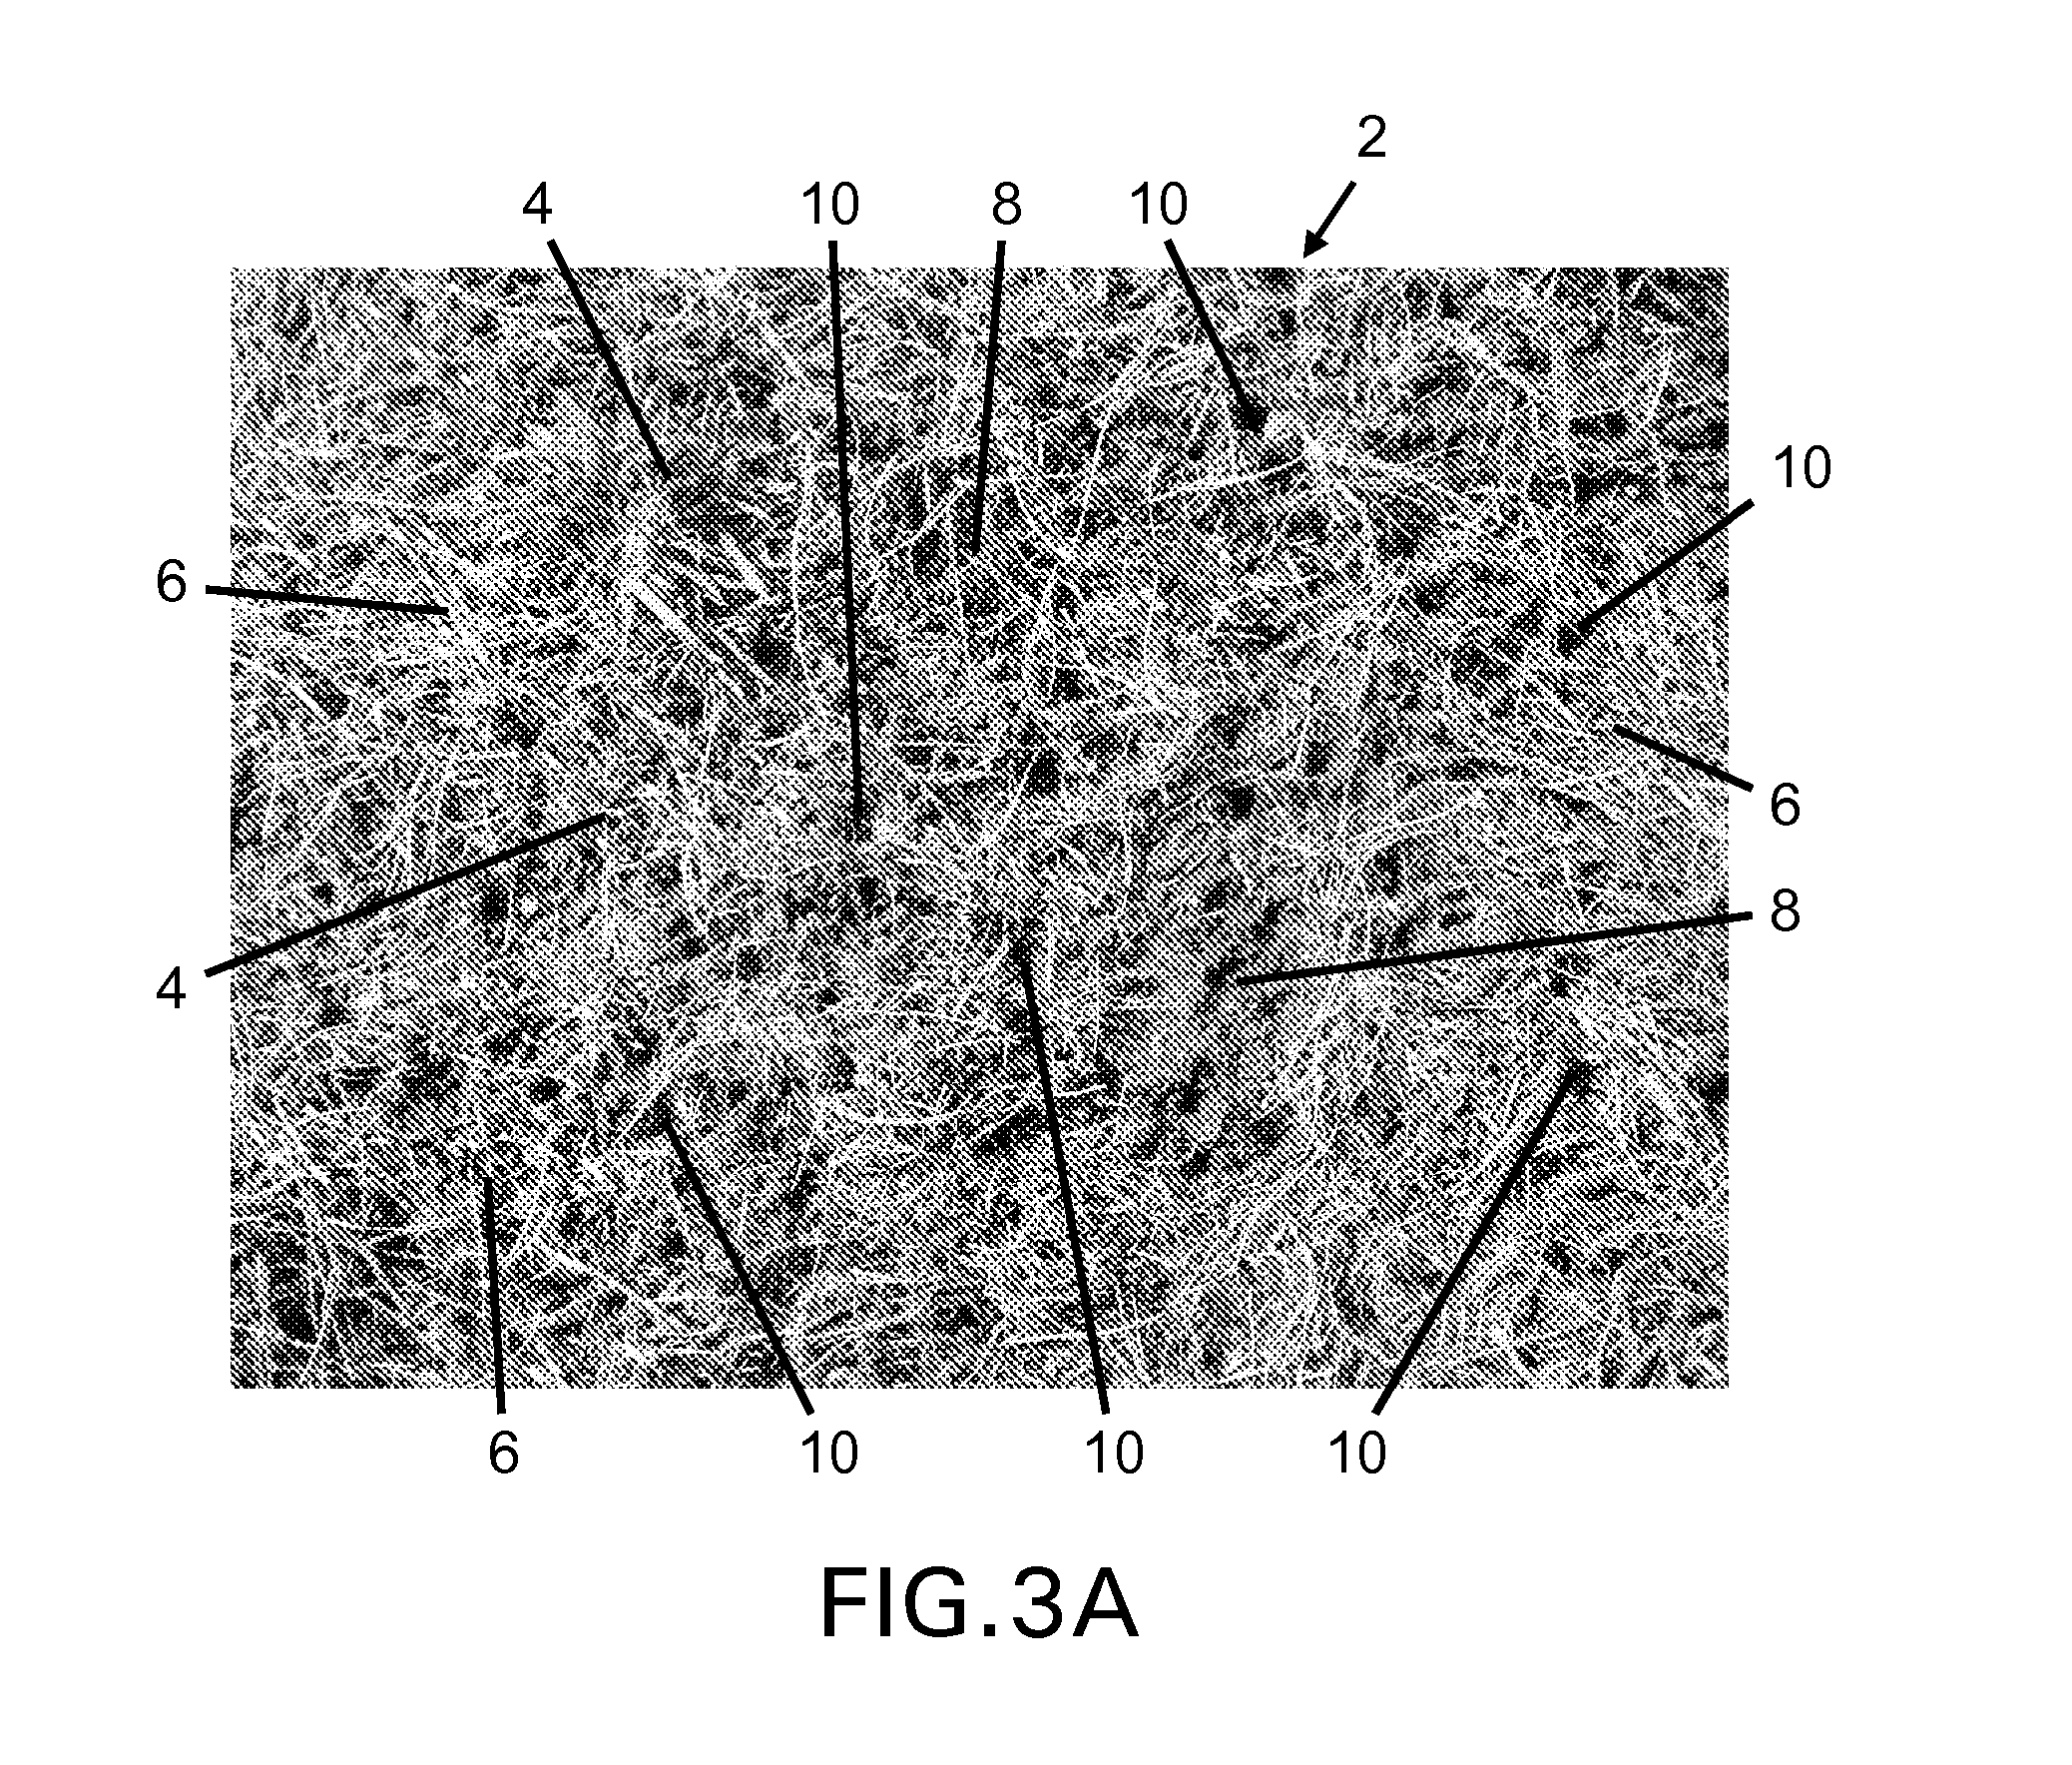 Lawn perforating tool and method of using same